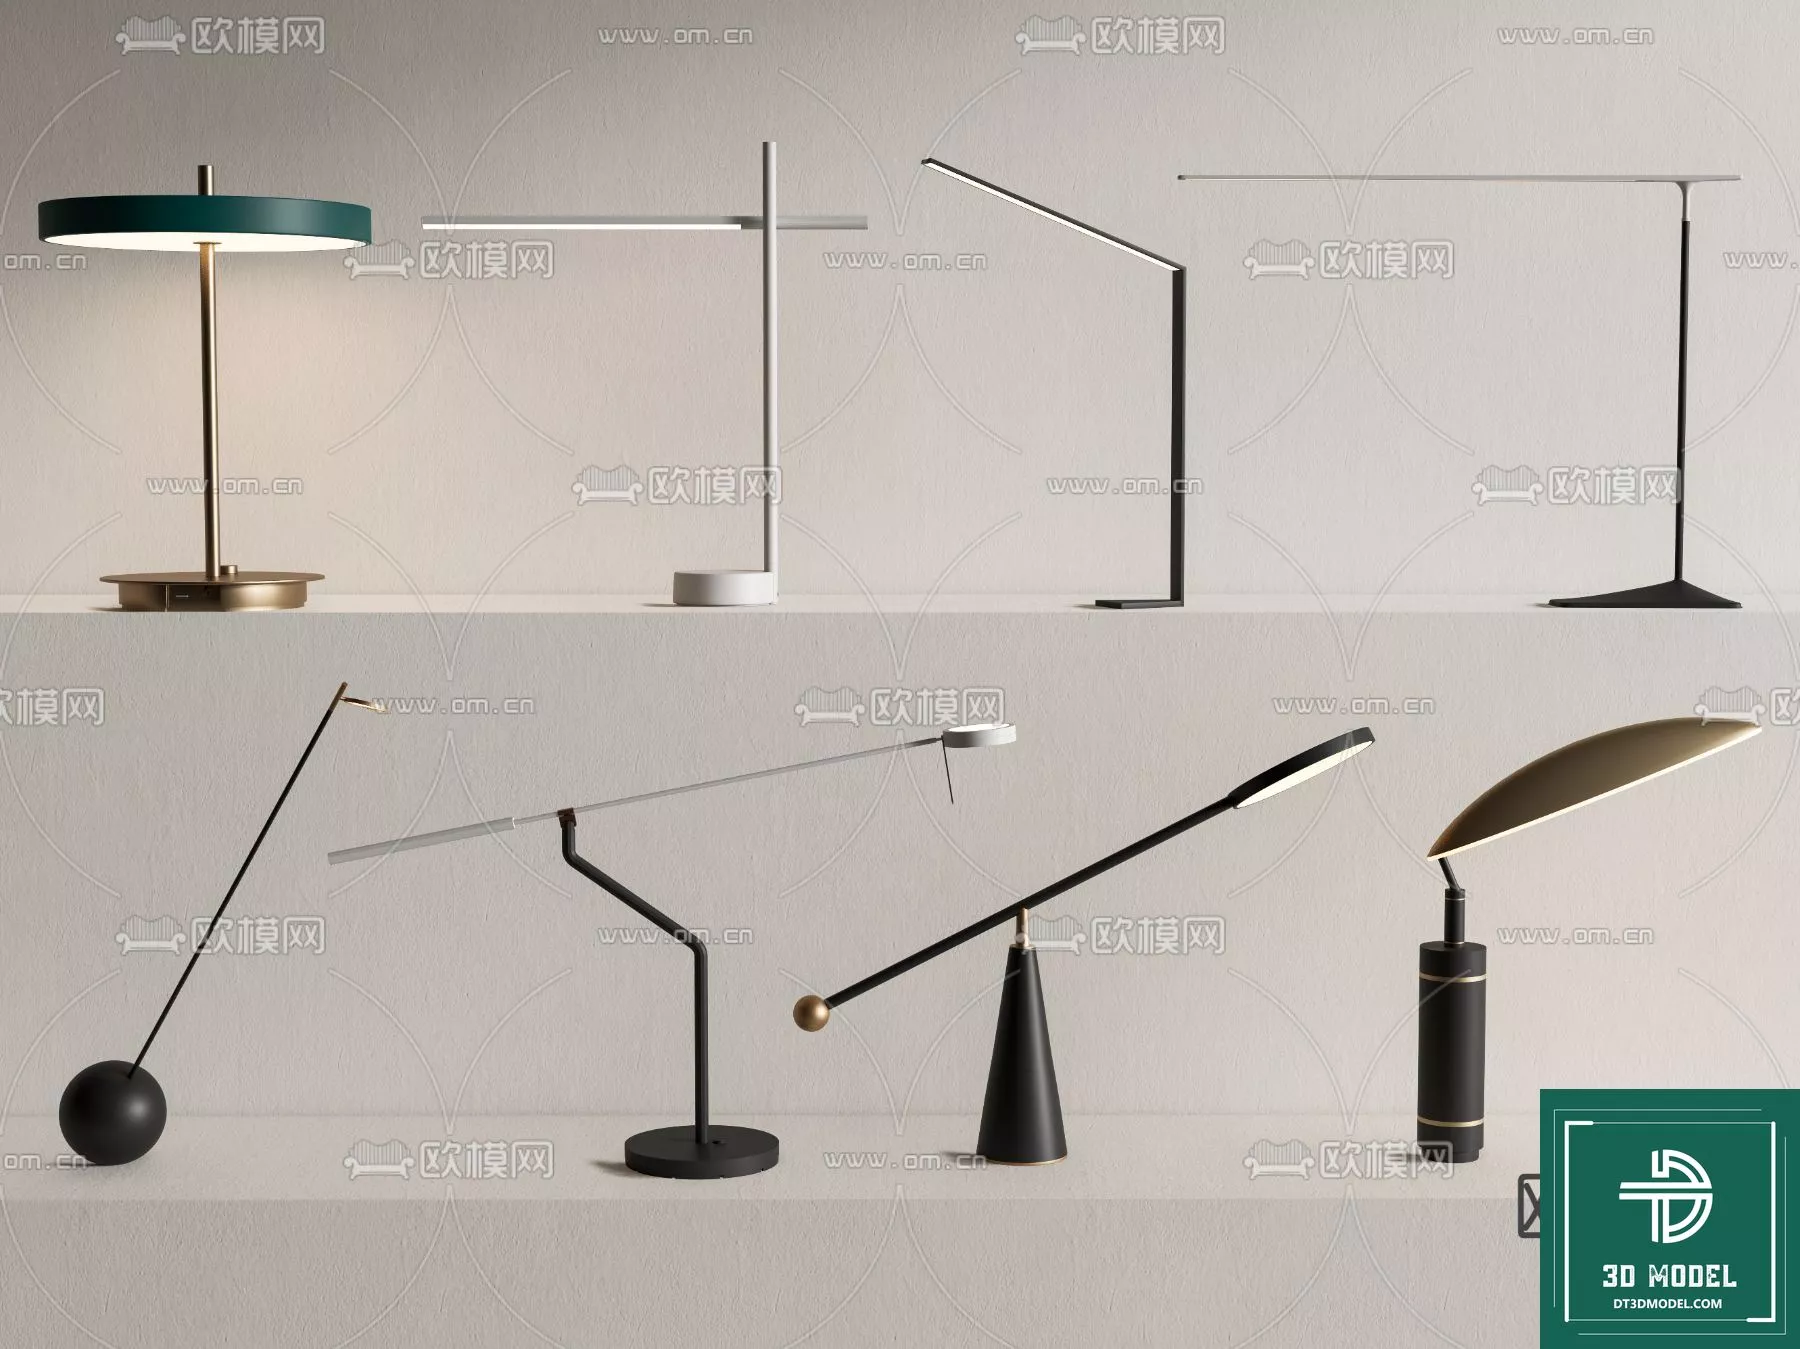 MODERN TABLE LAMP - SKETCHUP 3D MODEL - VRAY OR ENSCAPE - ID14547